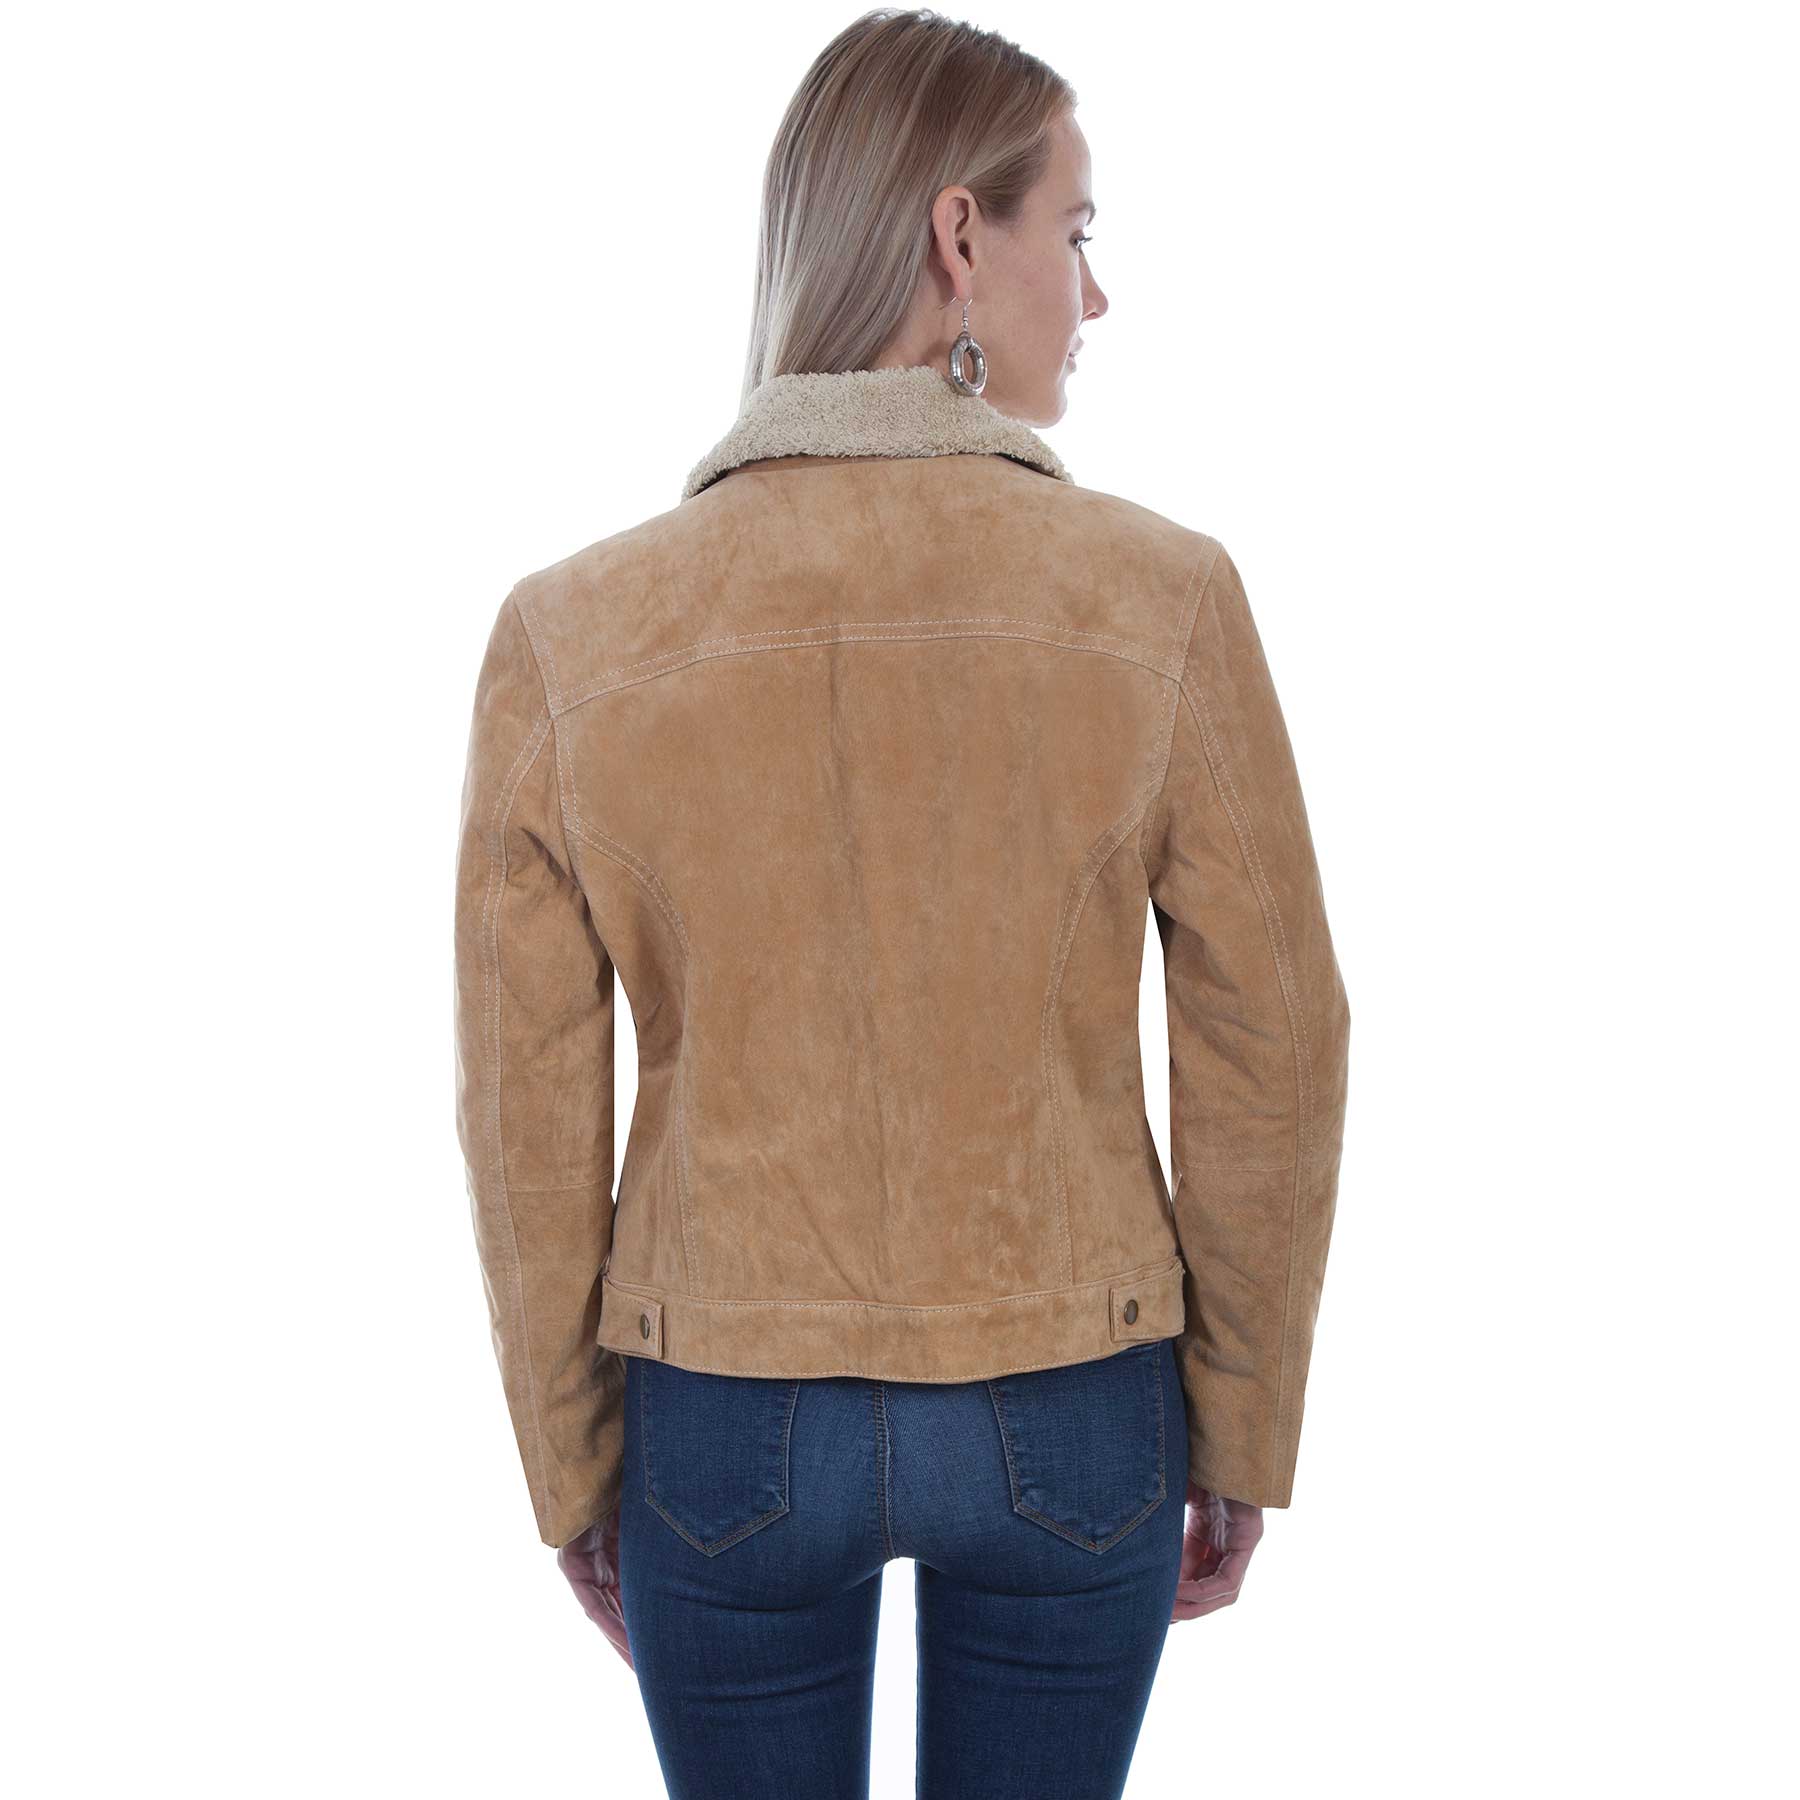 Pungo Ridge - Scully Ladies Suede Jean Jacket - Old Rust, Scully Women ...